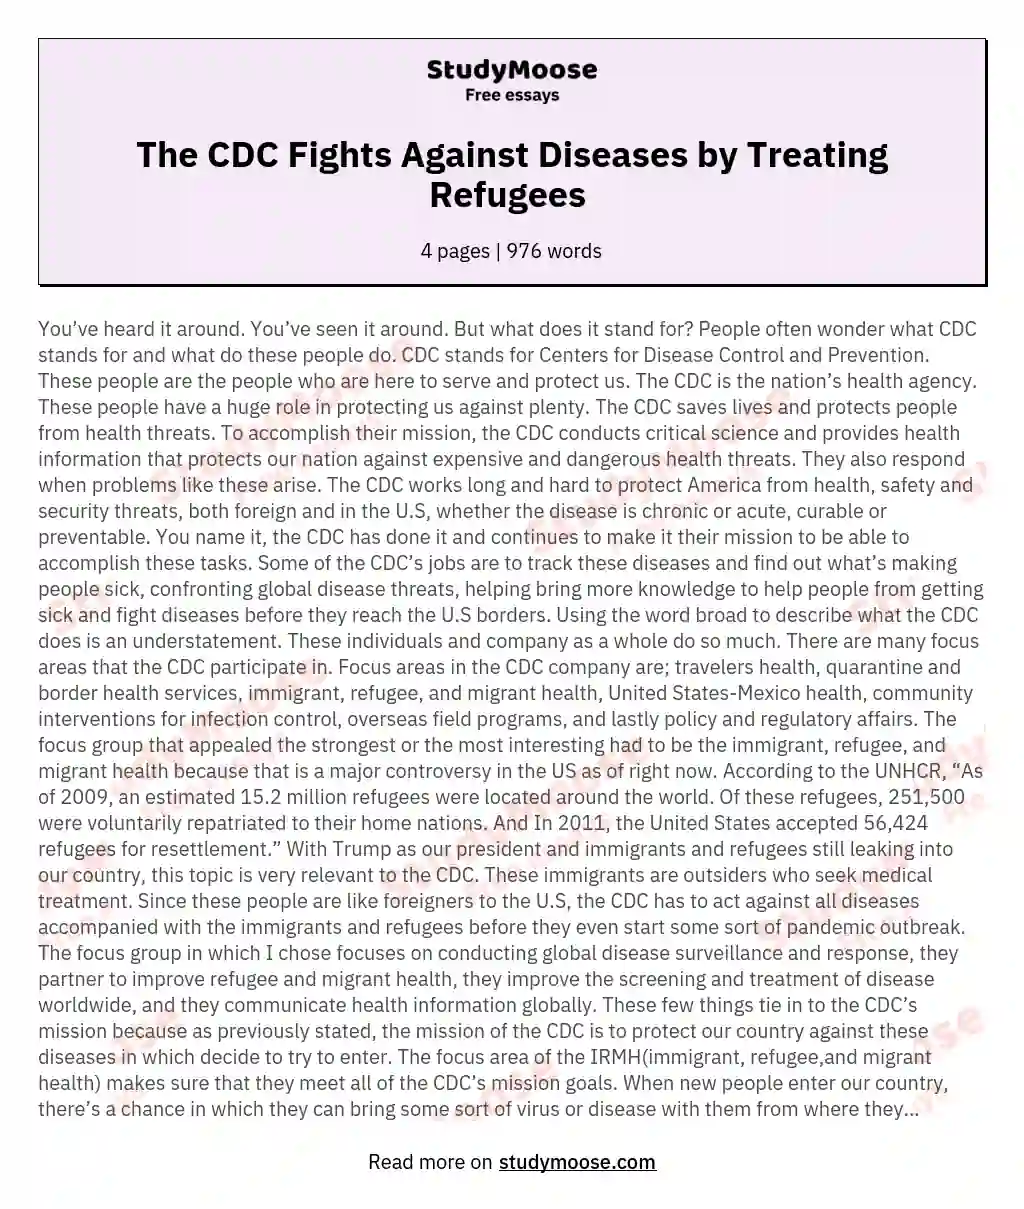 The CDC Fights Against Diseases by Treating Refugees  essay